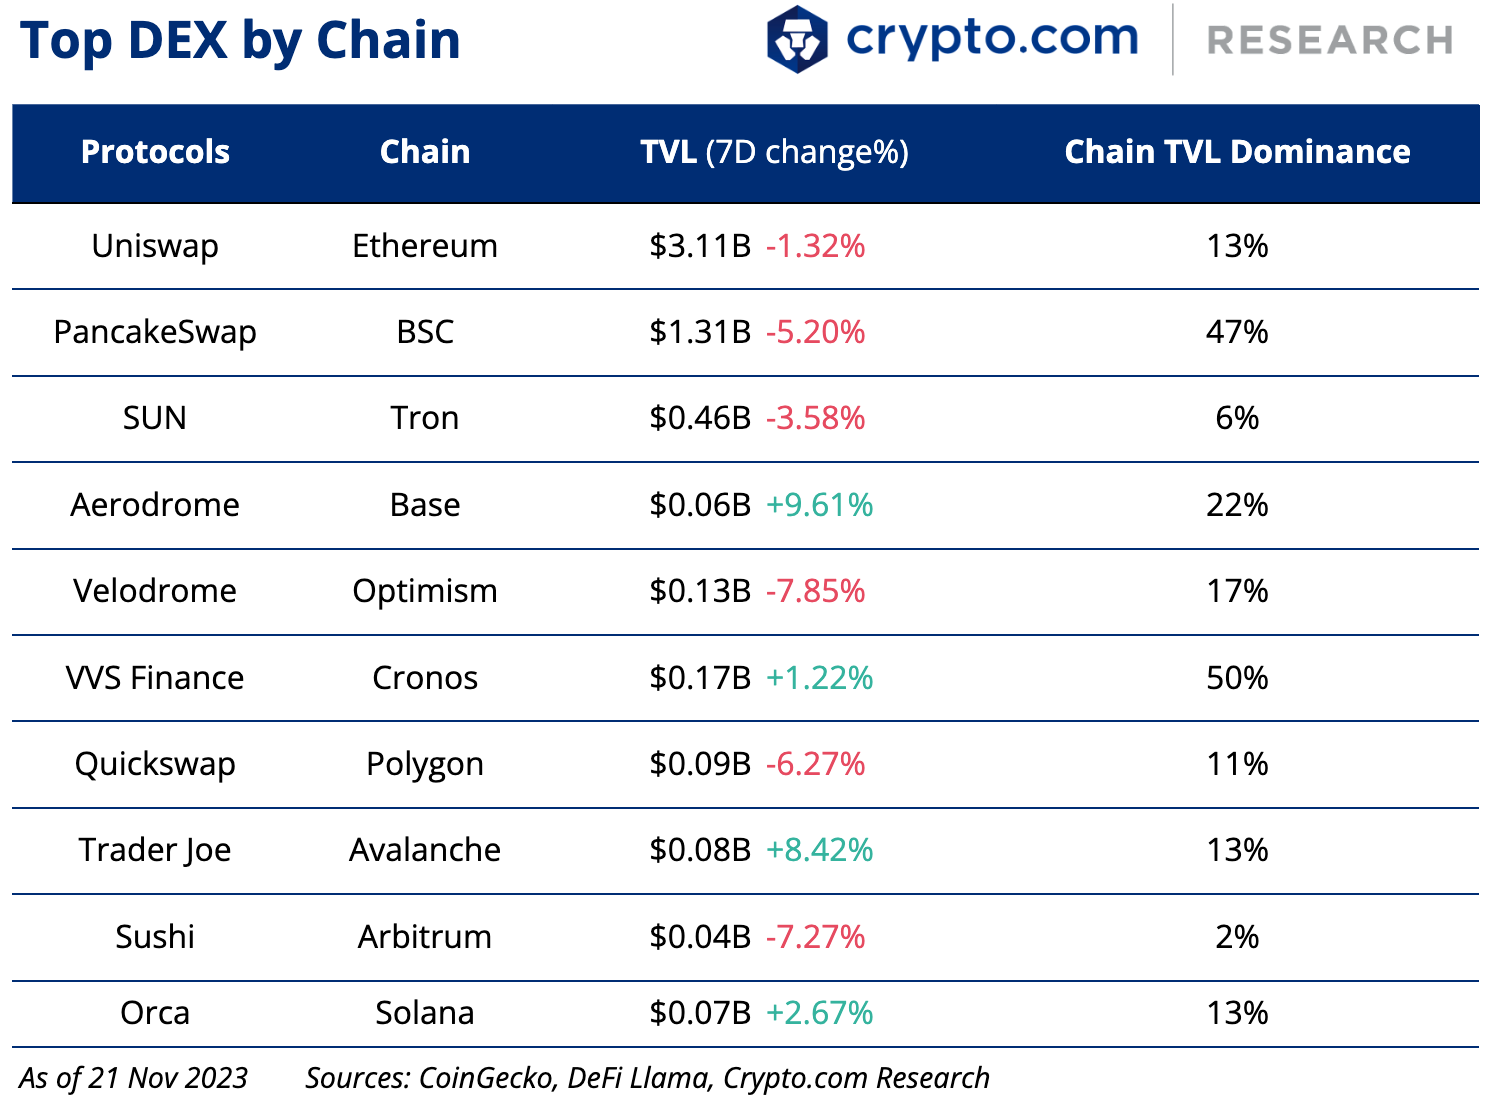 Crypto.com Top DEX by Chain